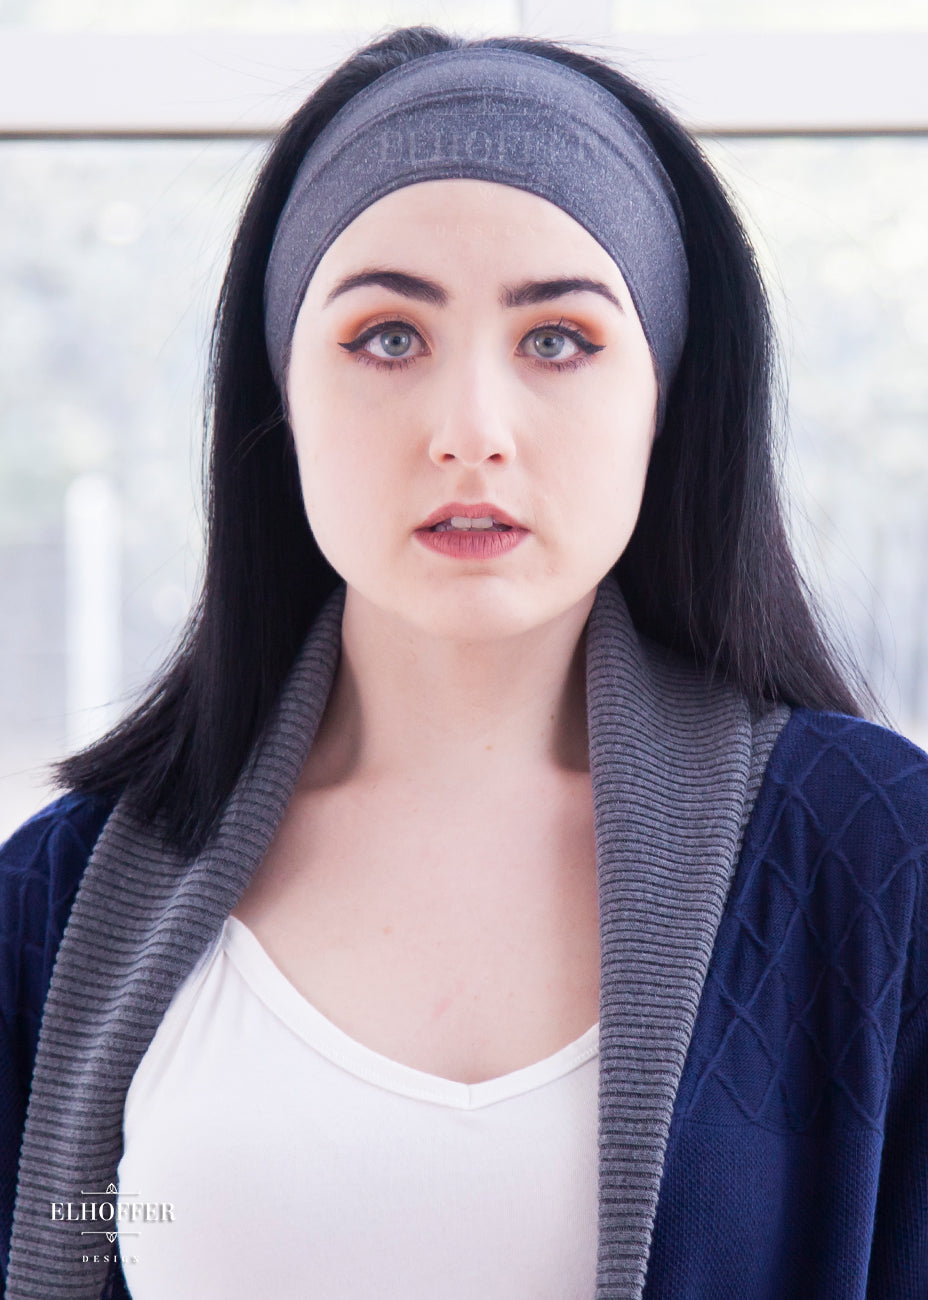 A heathered charcoal grey headband with hemmed edges. The headband is around 3" at the top and gradually gets smaller as it goes around the head.